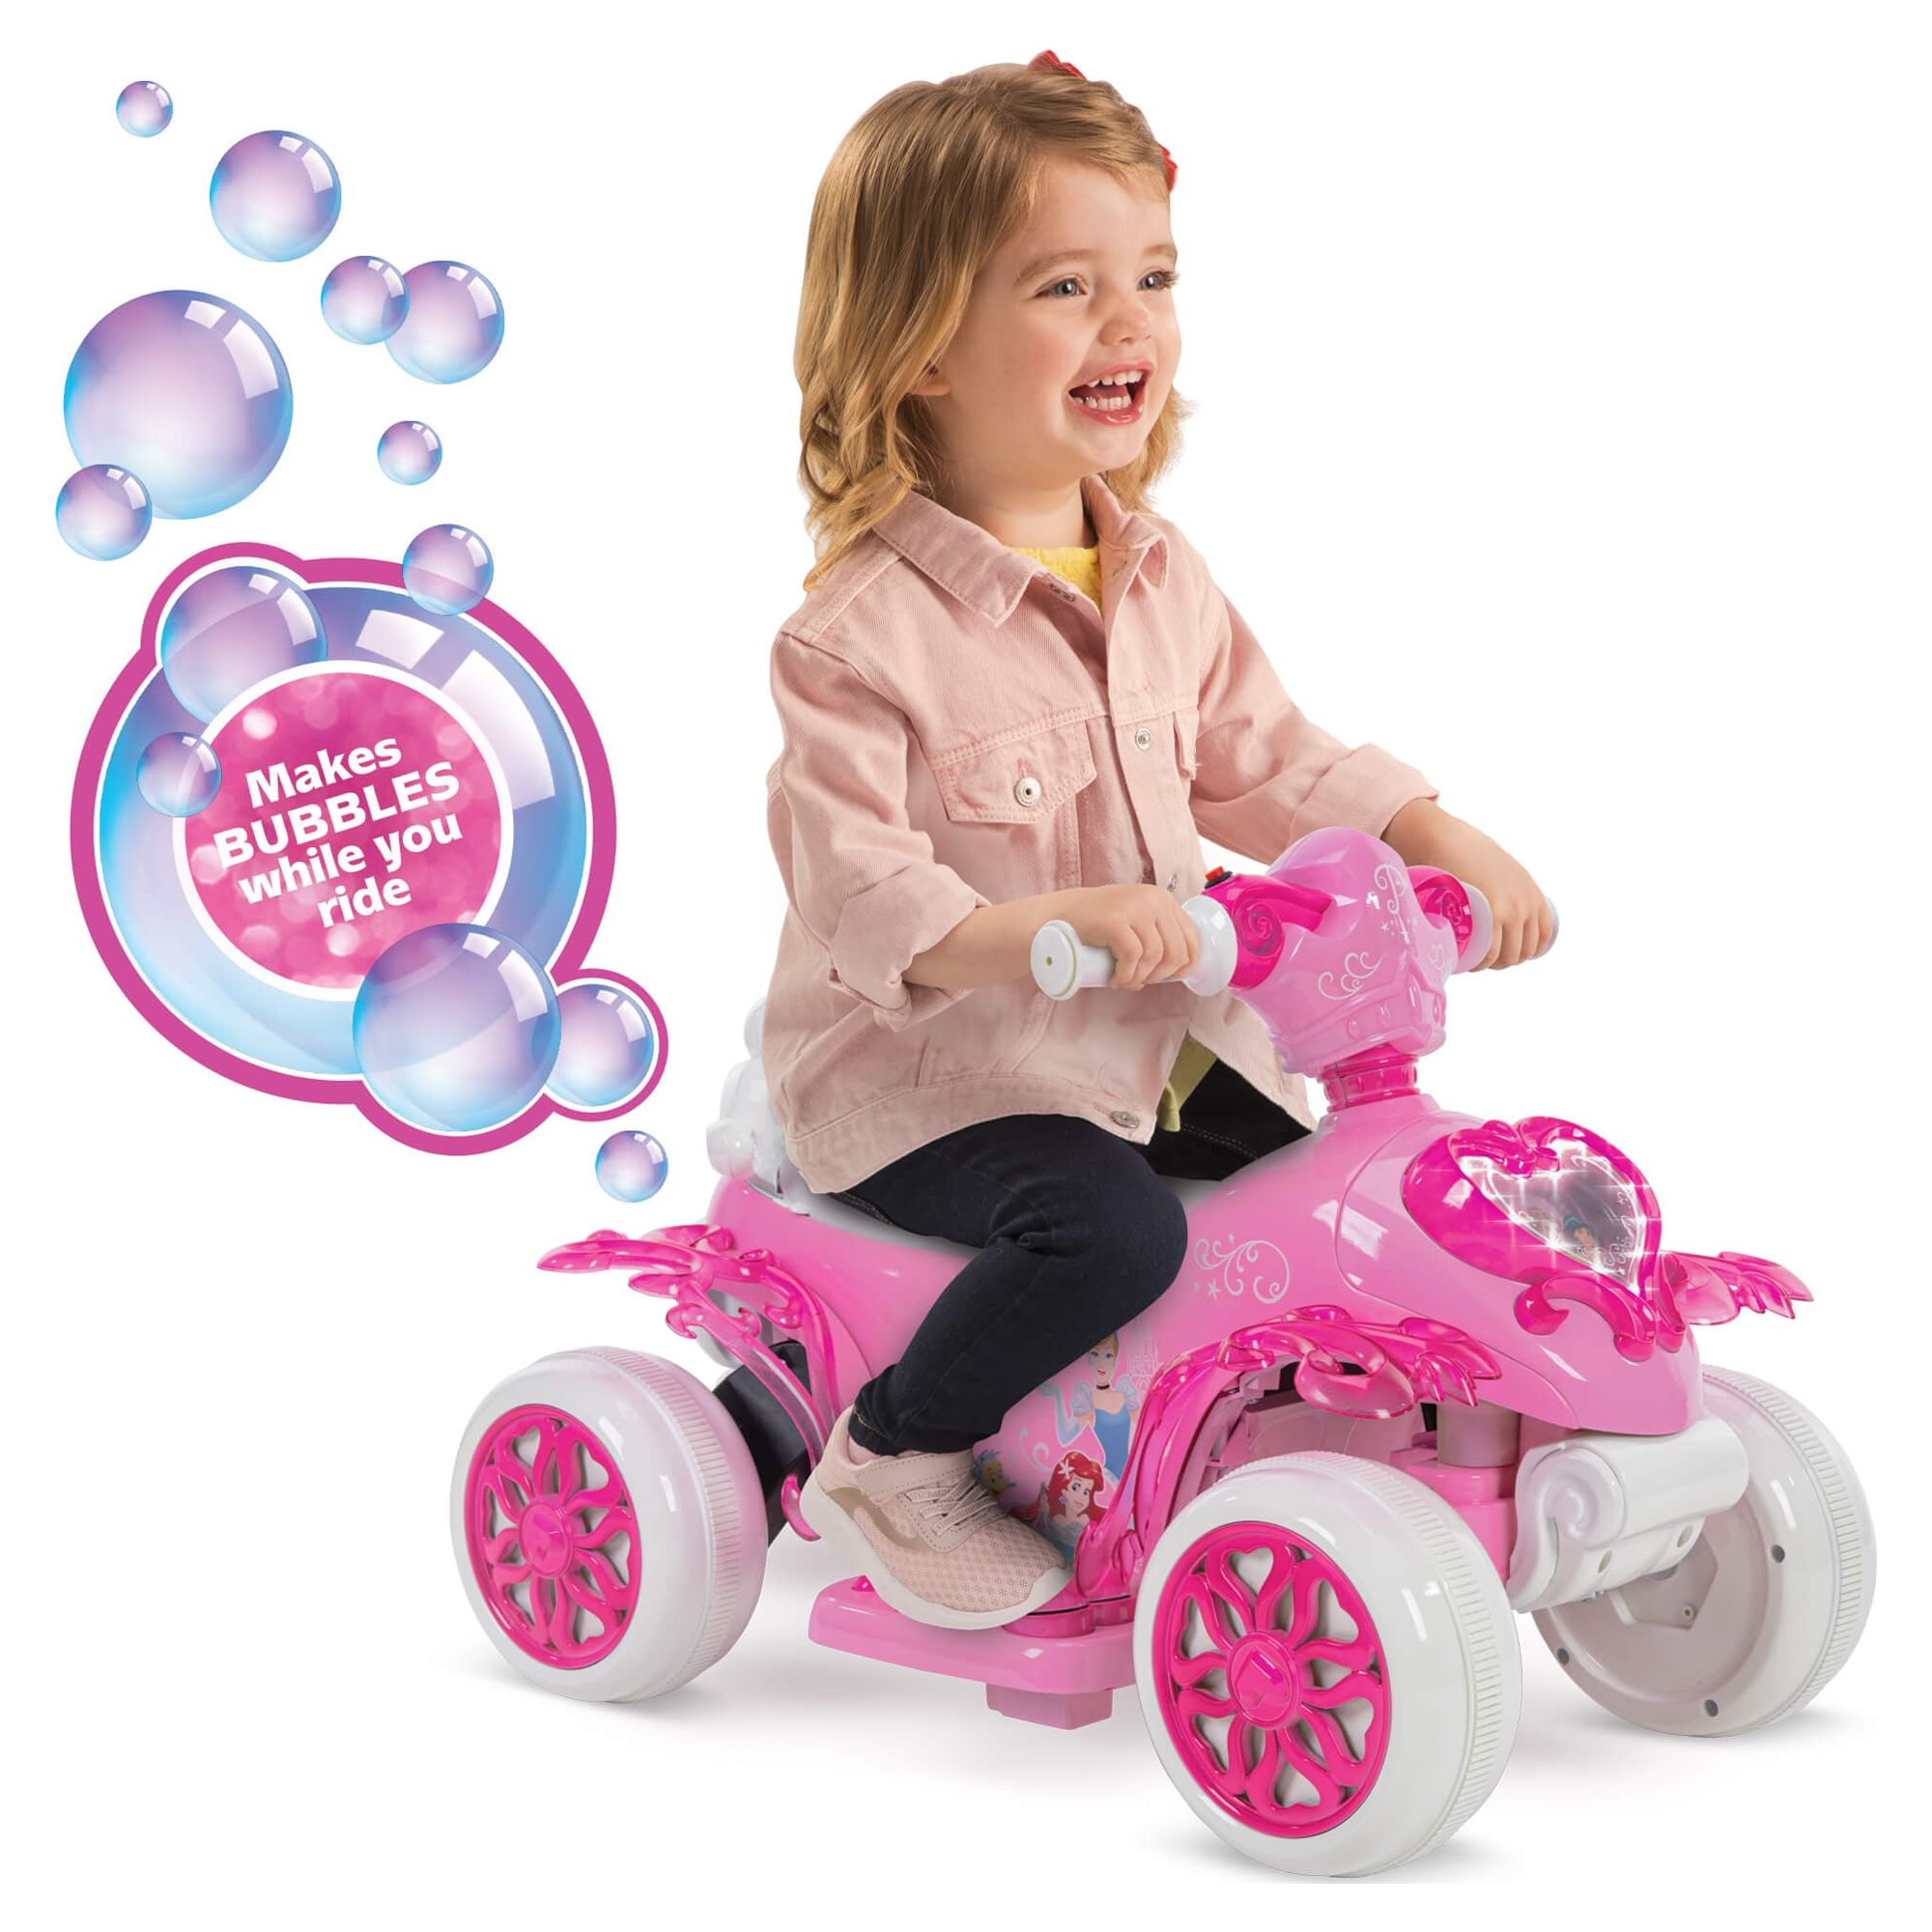 Disney Princess Electric Ride-on Quad, for Children ages 18 months+,  by Huffy - image 1 of 16